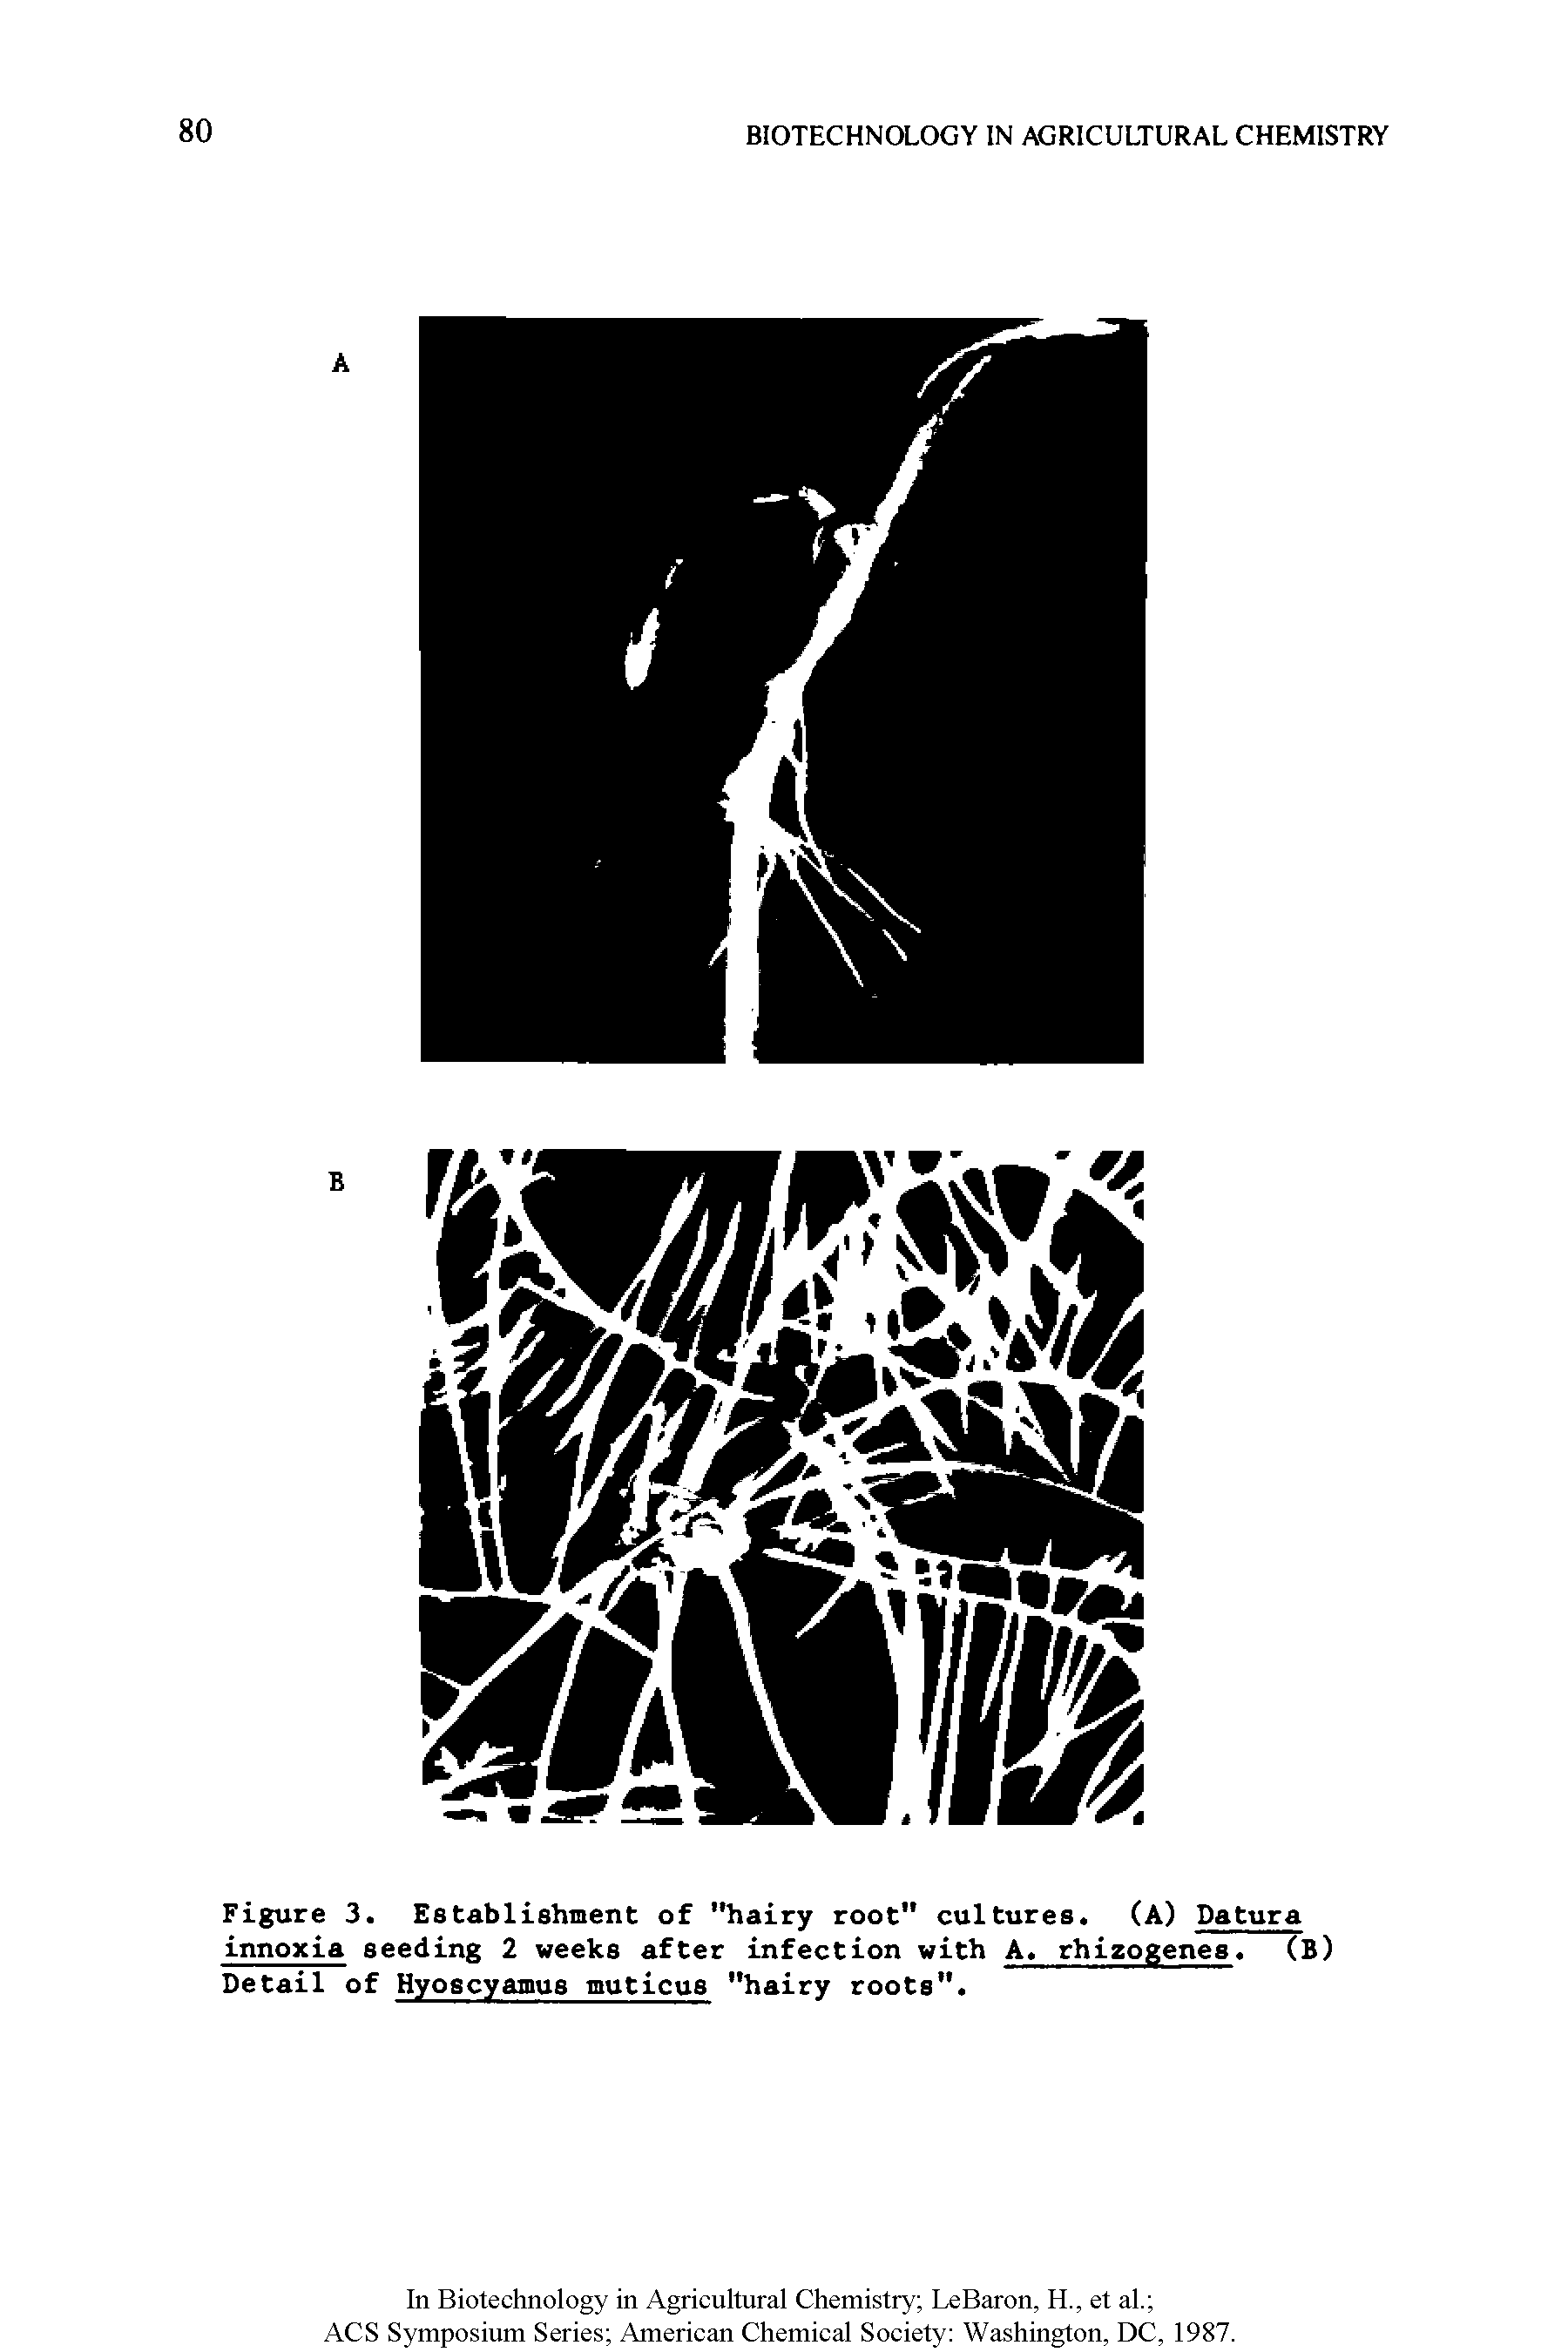 Figure 3. Establishment of "hairy root" cultures. (A) Datura innoxia seeding 2 weeks after infection with A. rhizogenes. (B) Detail of Hyoscyamus muticus "hairy roots".